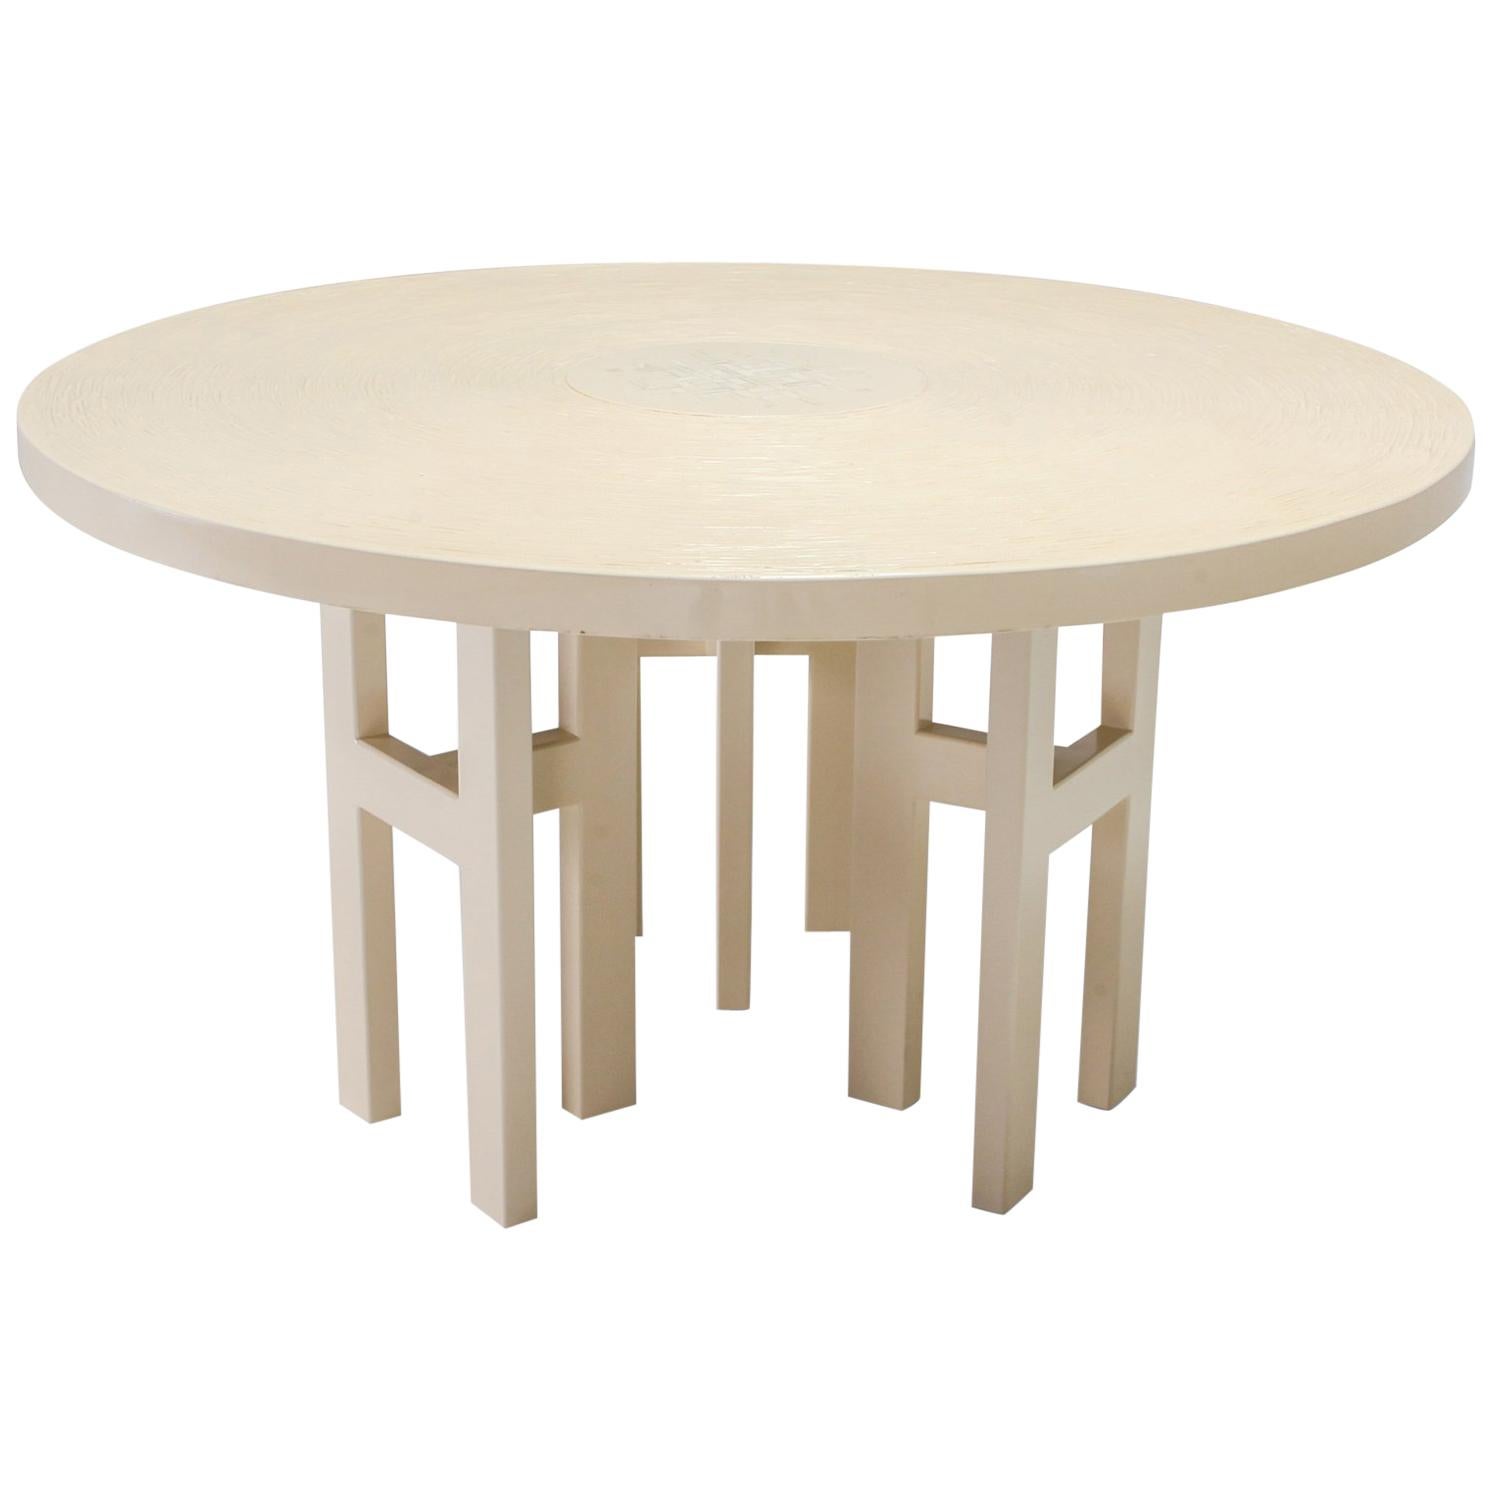 Jean Claude Dresse Exceptional Resin Dining Table